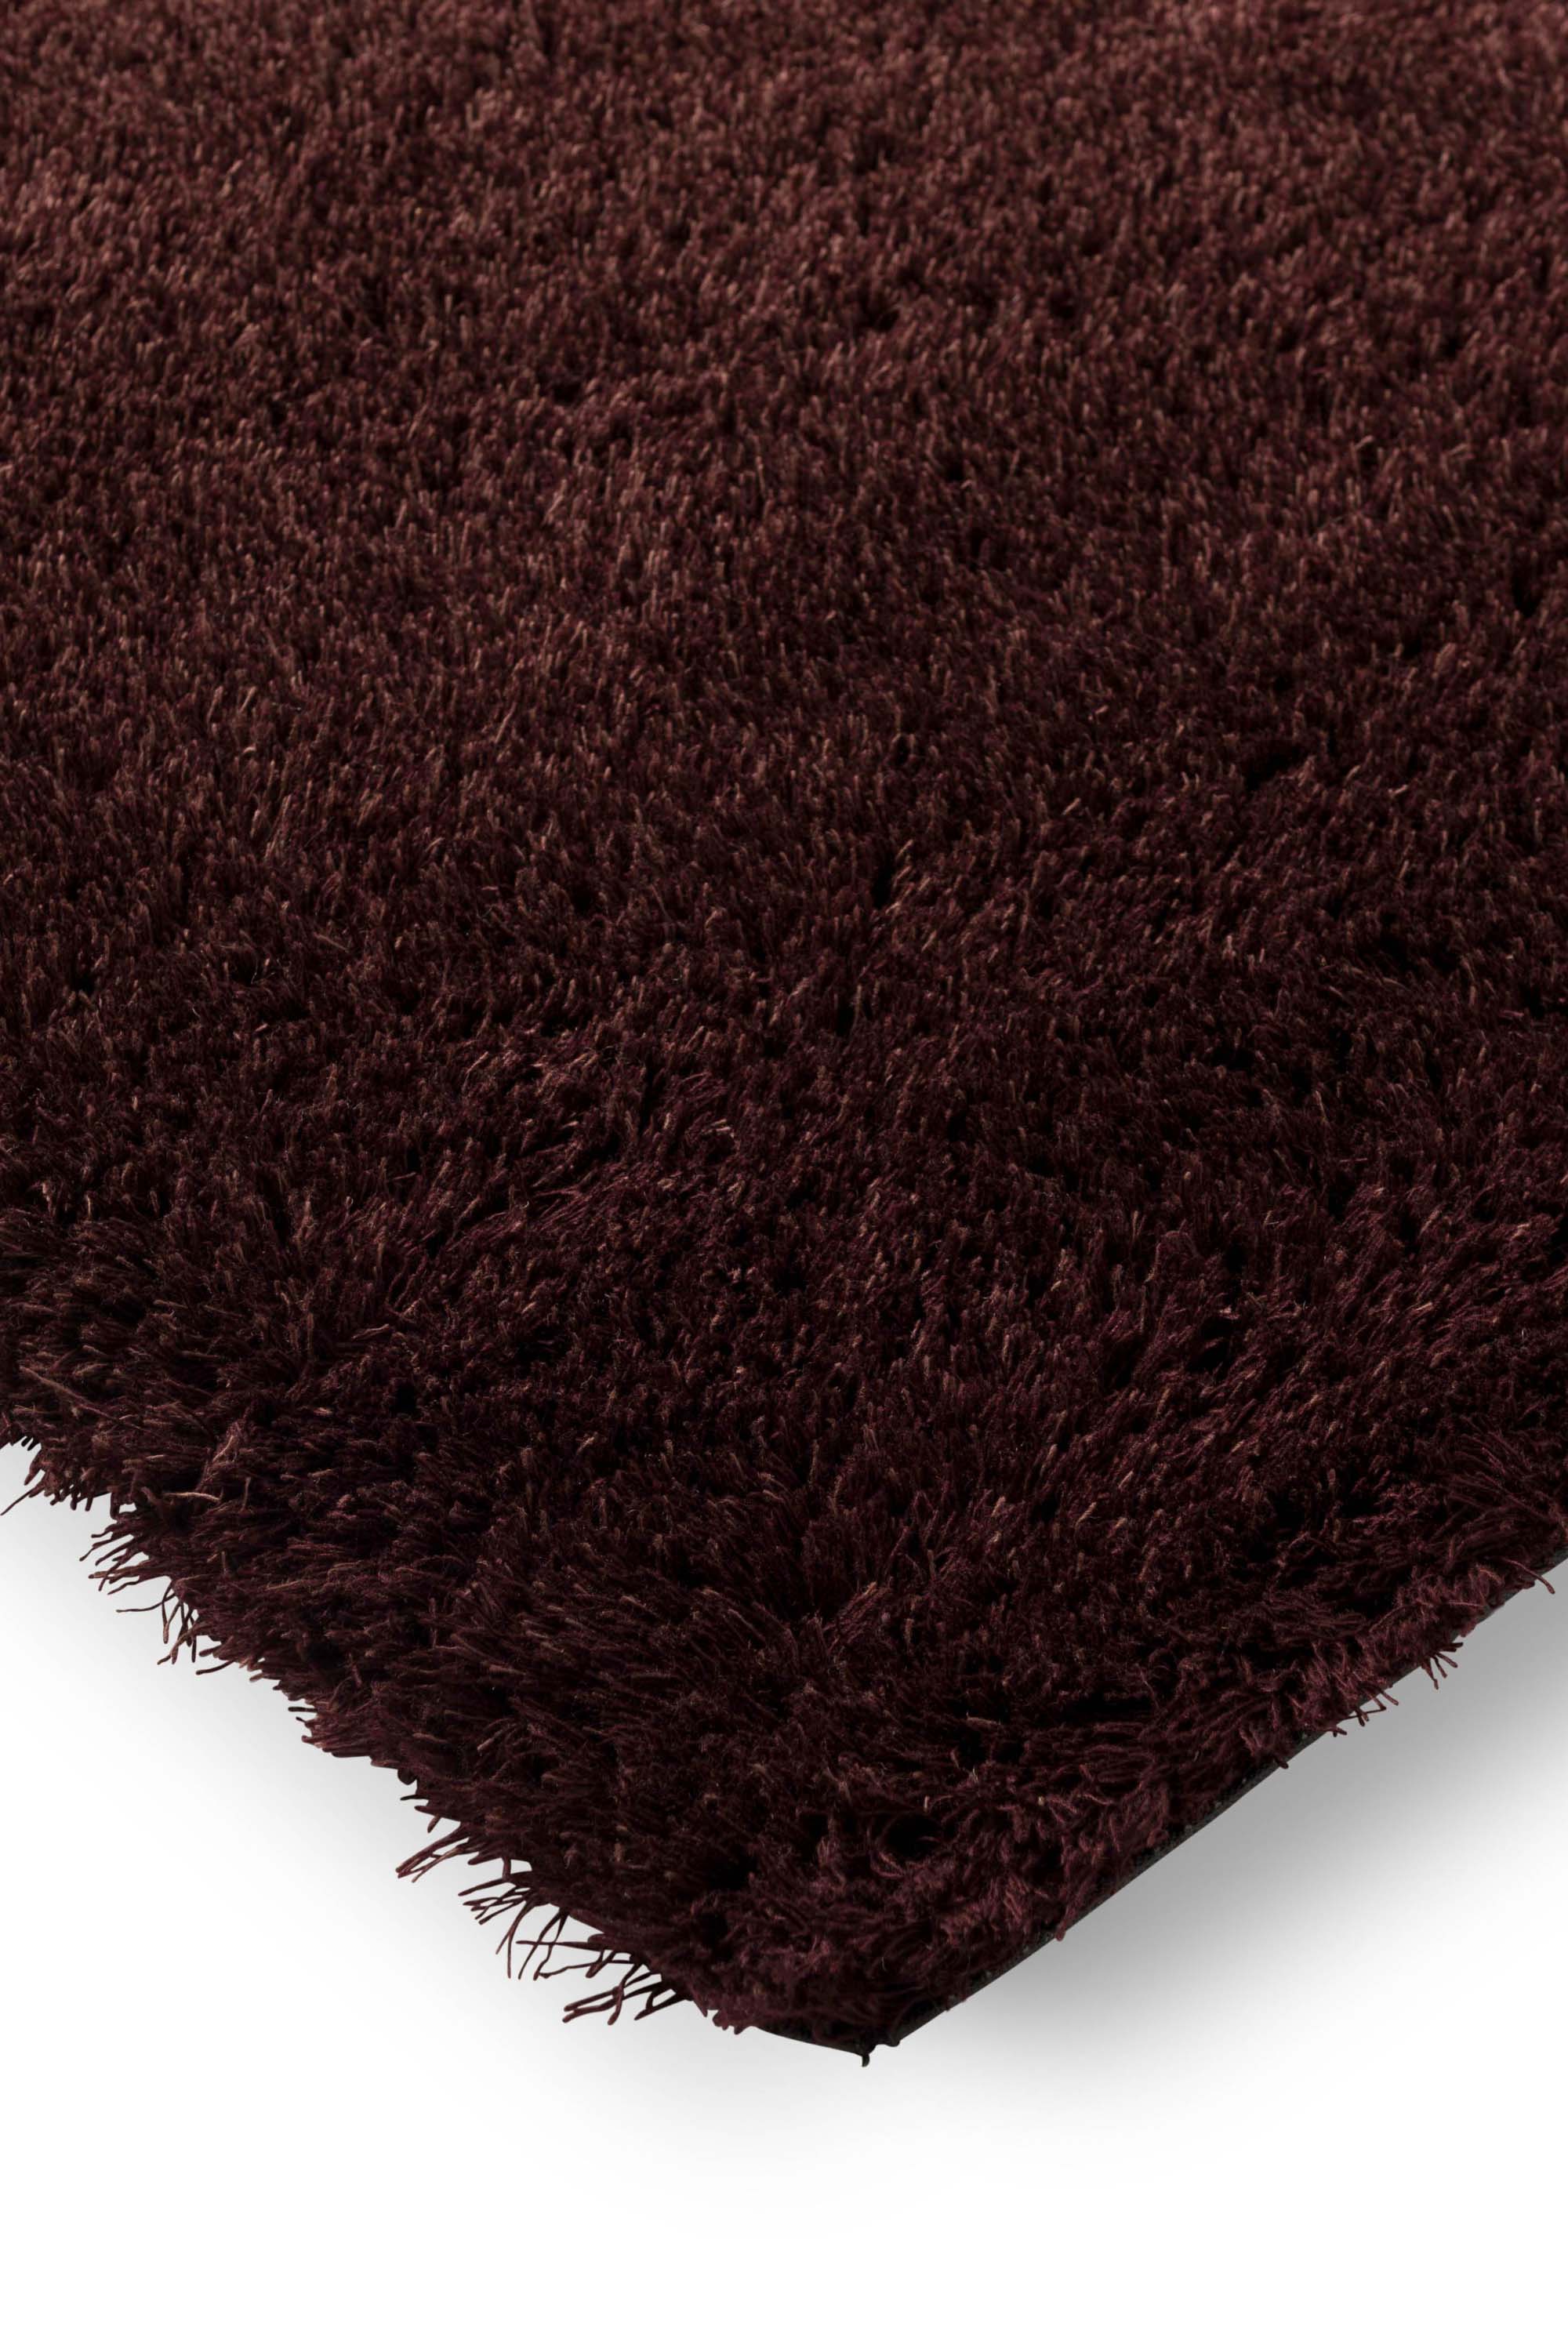 Plain red rug with shaggy pile